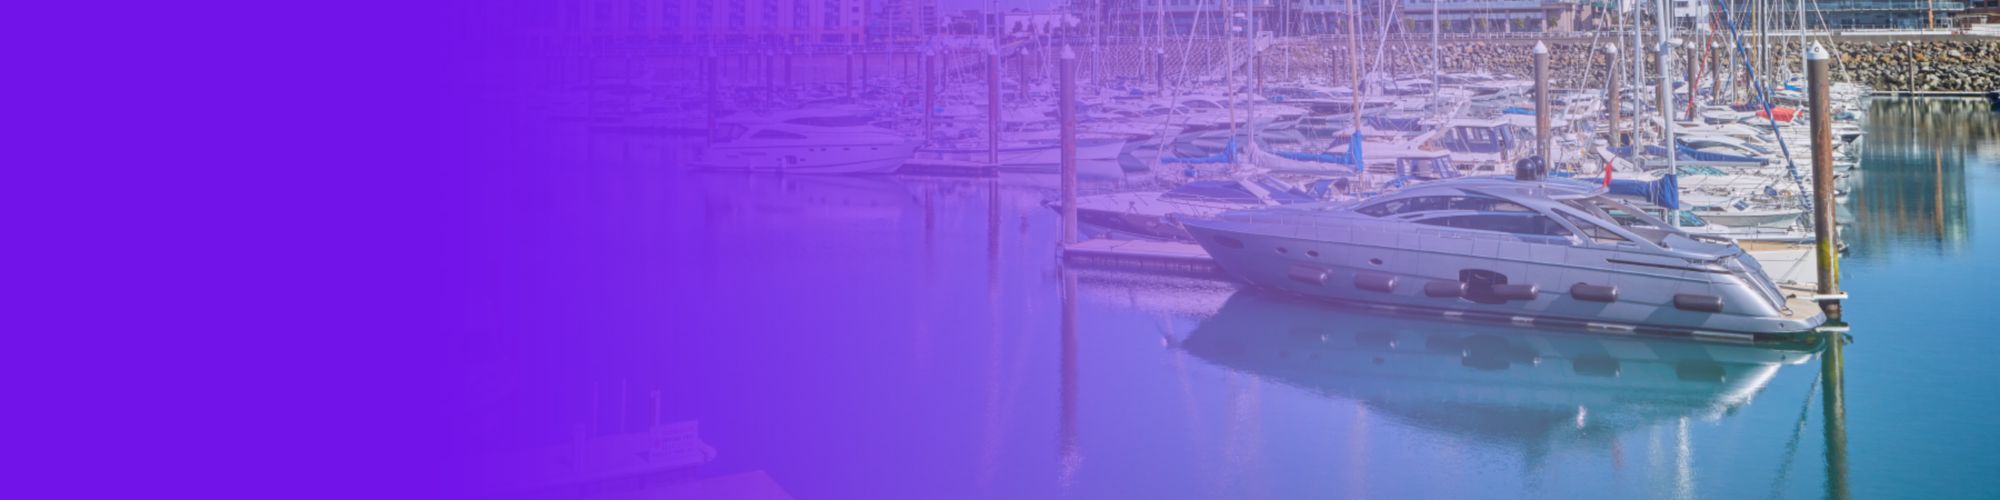 purple gradient fading into a marina with boat